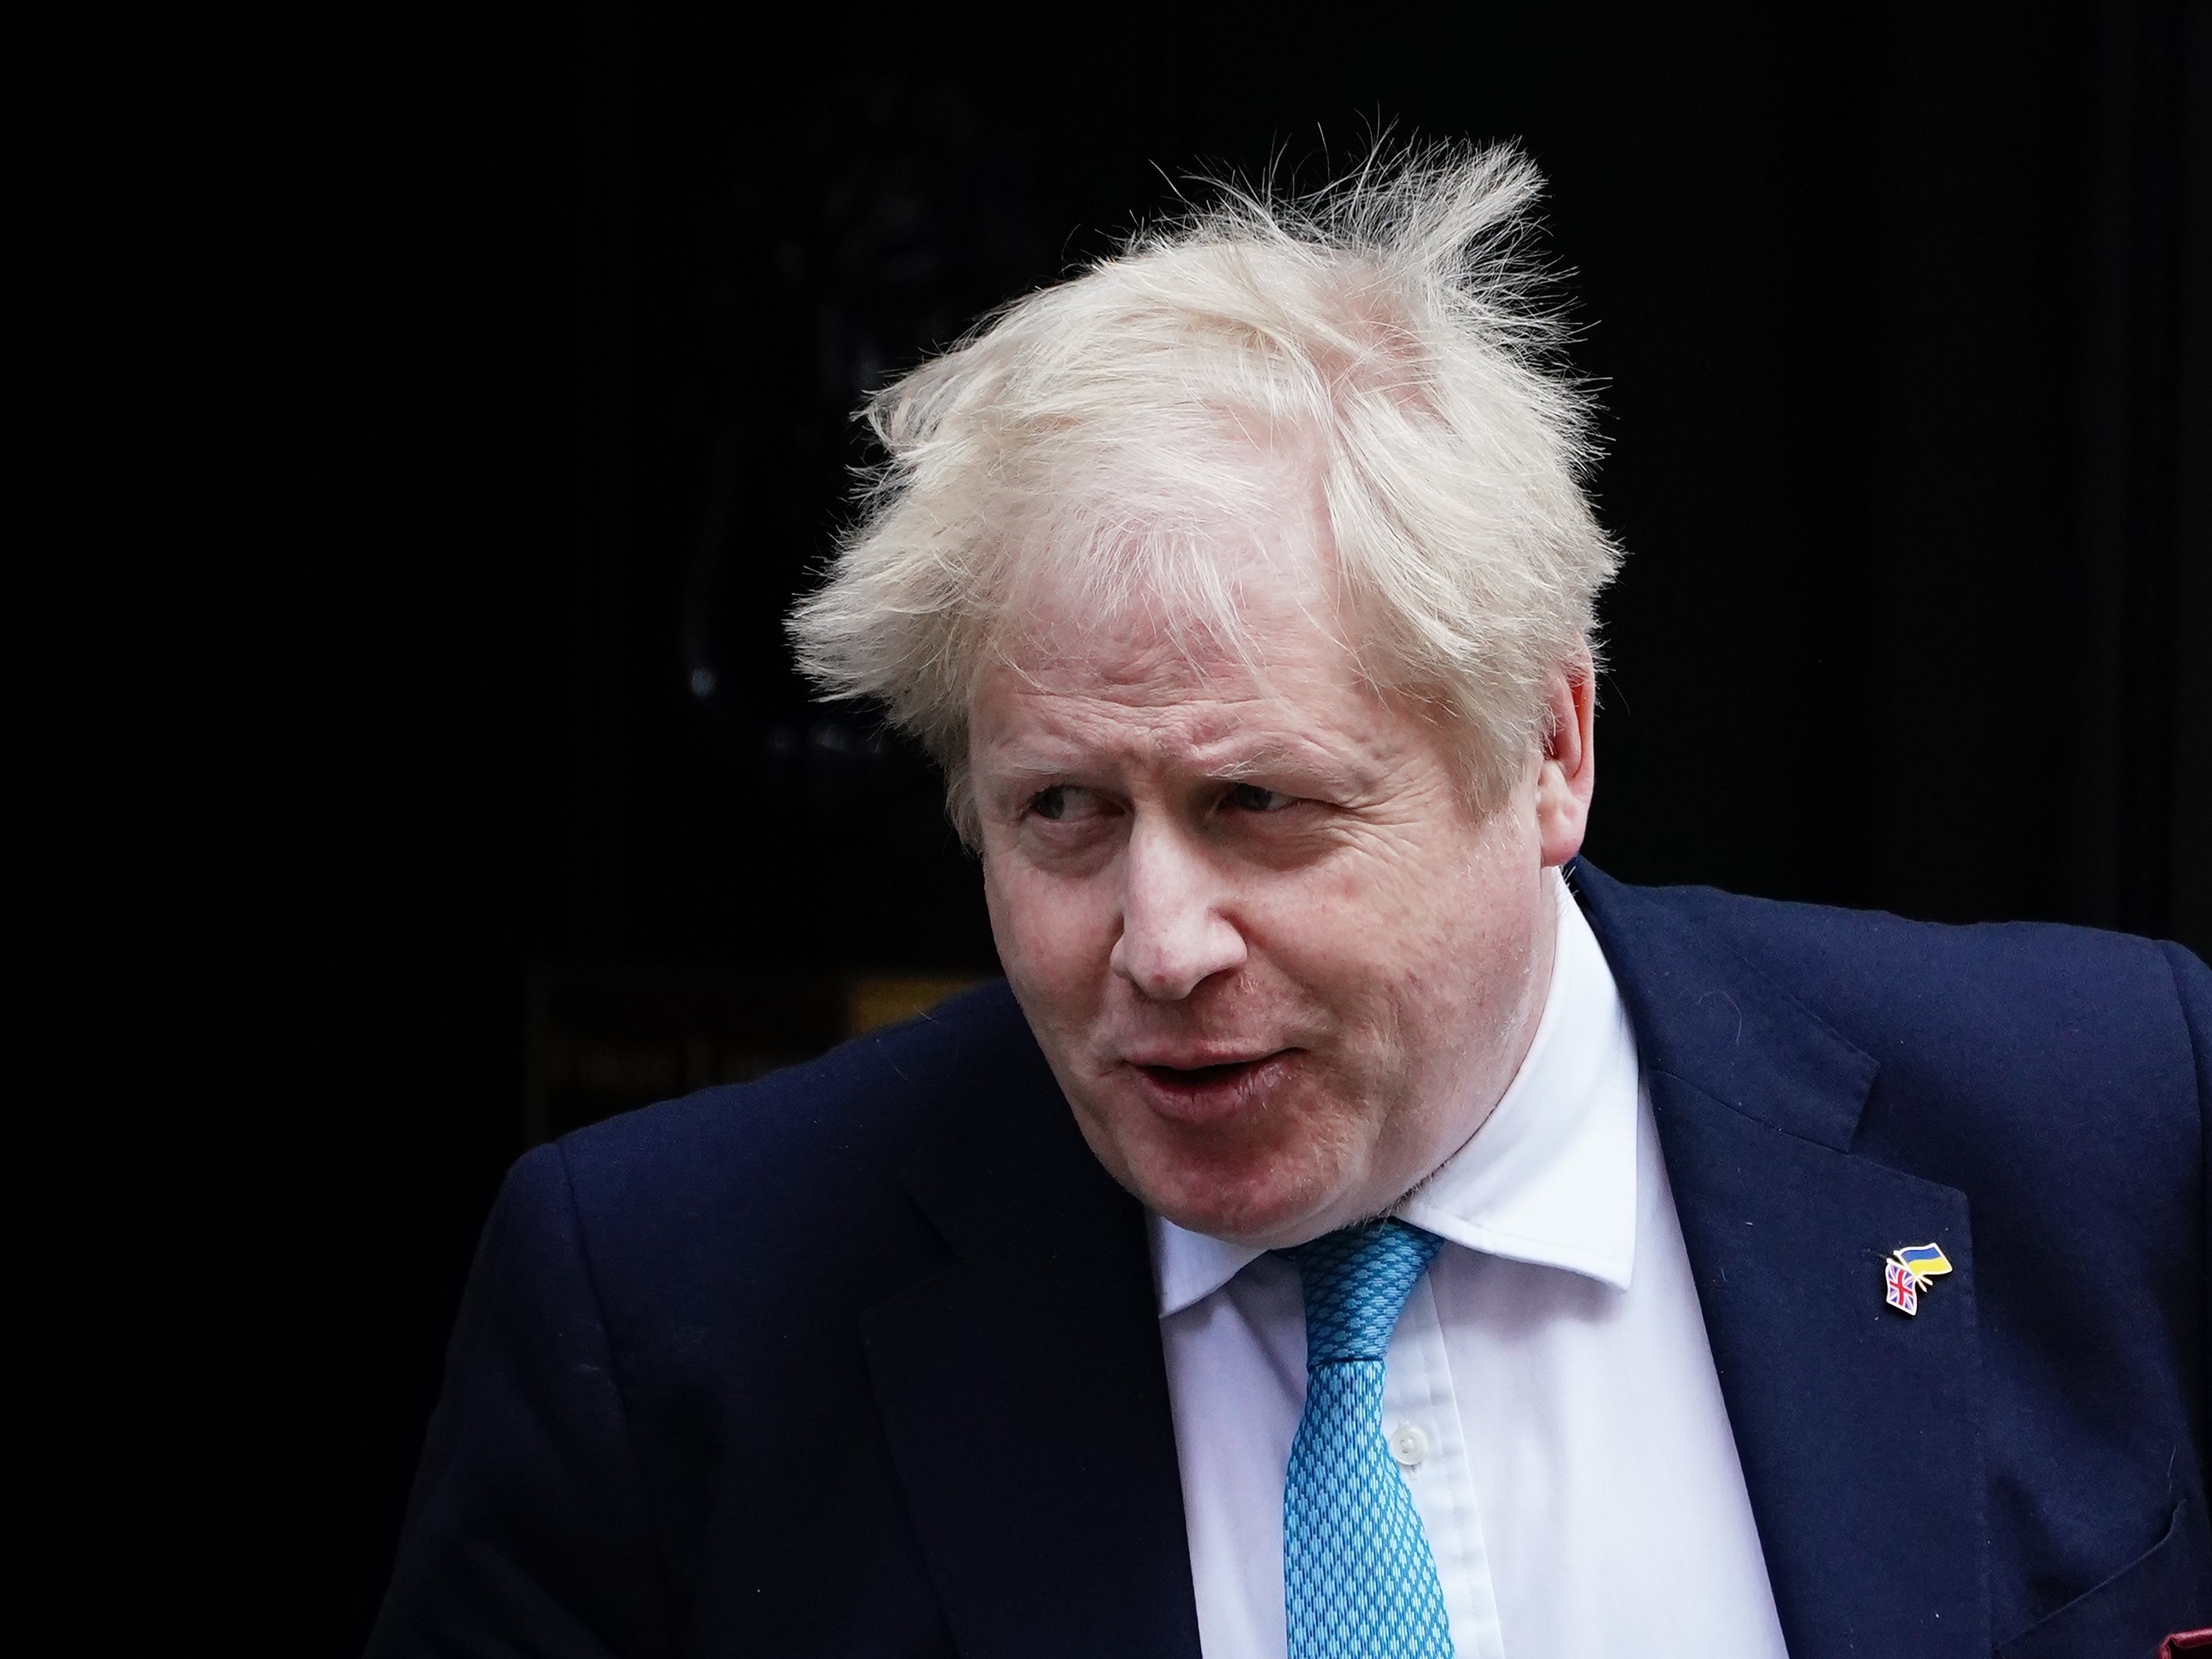 Boris Johnson will attend the first part of a gathering of world leaders in Brussels